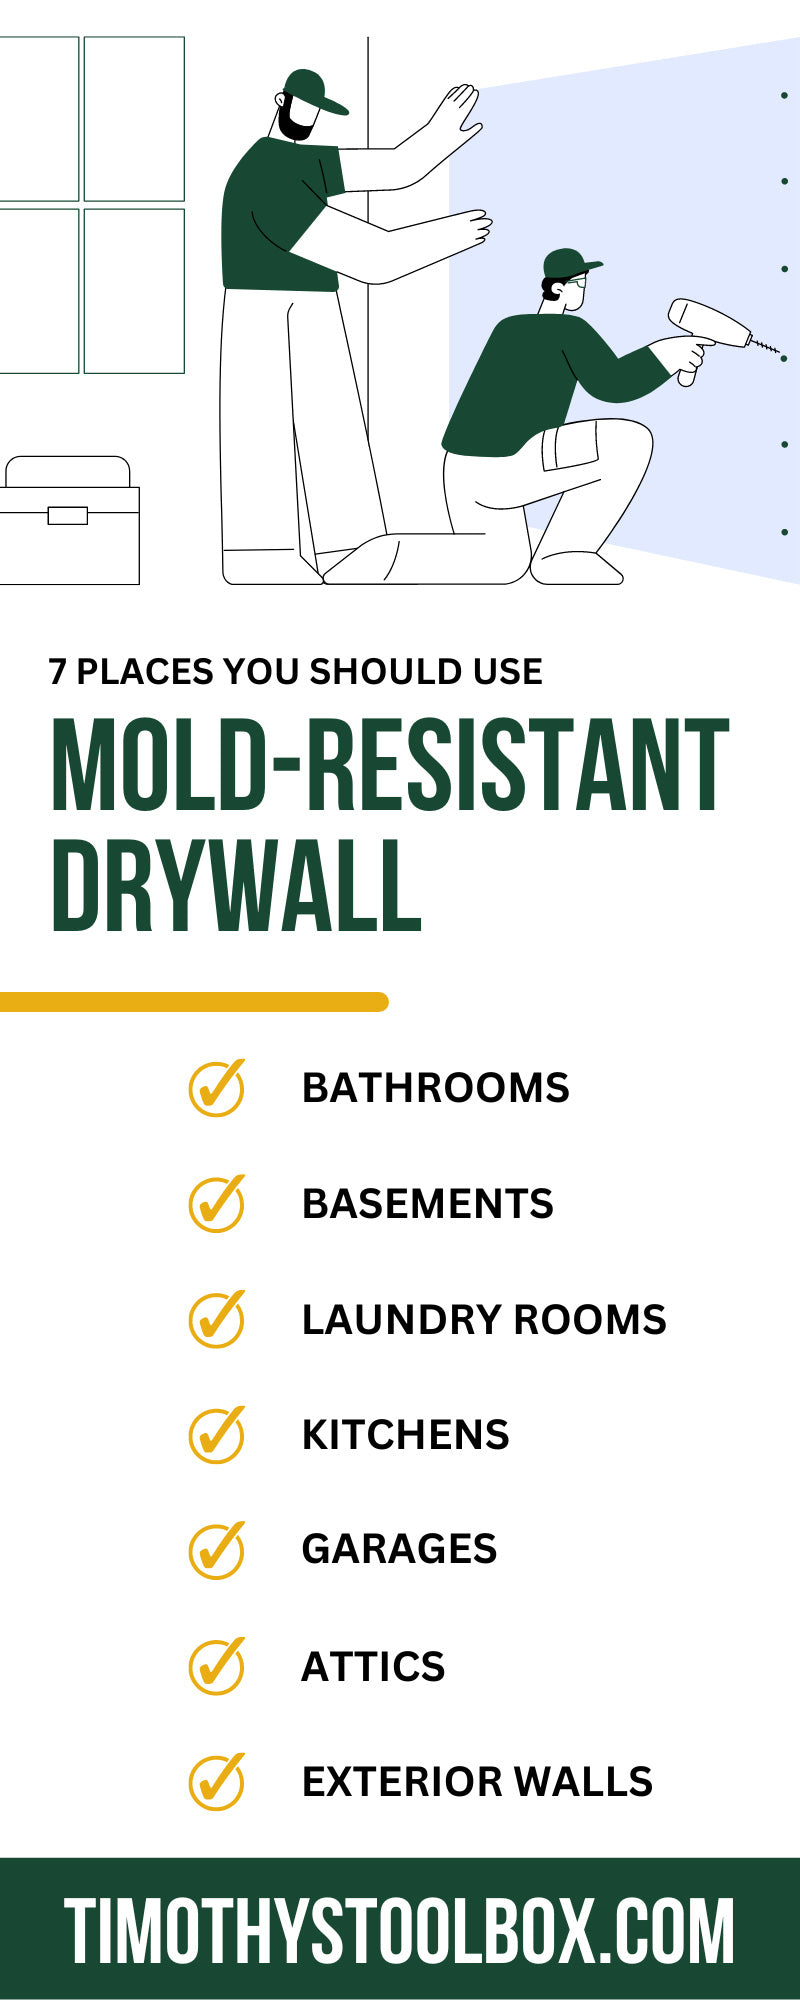 7 Places You Should Use Mold-Resistant Drywall